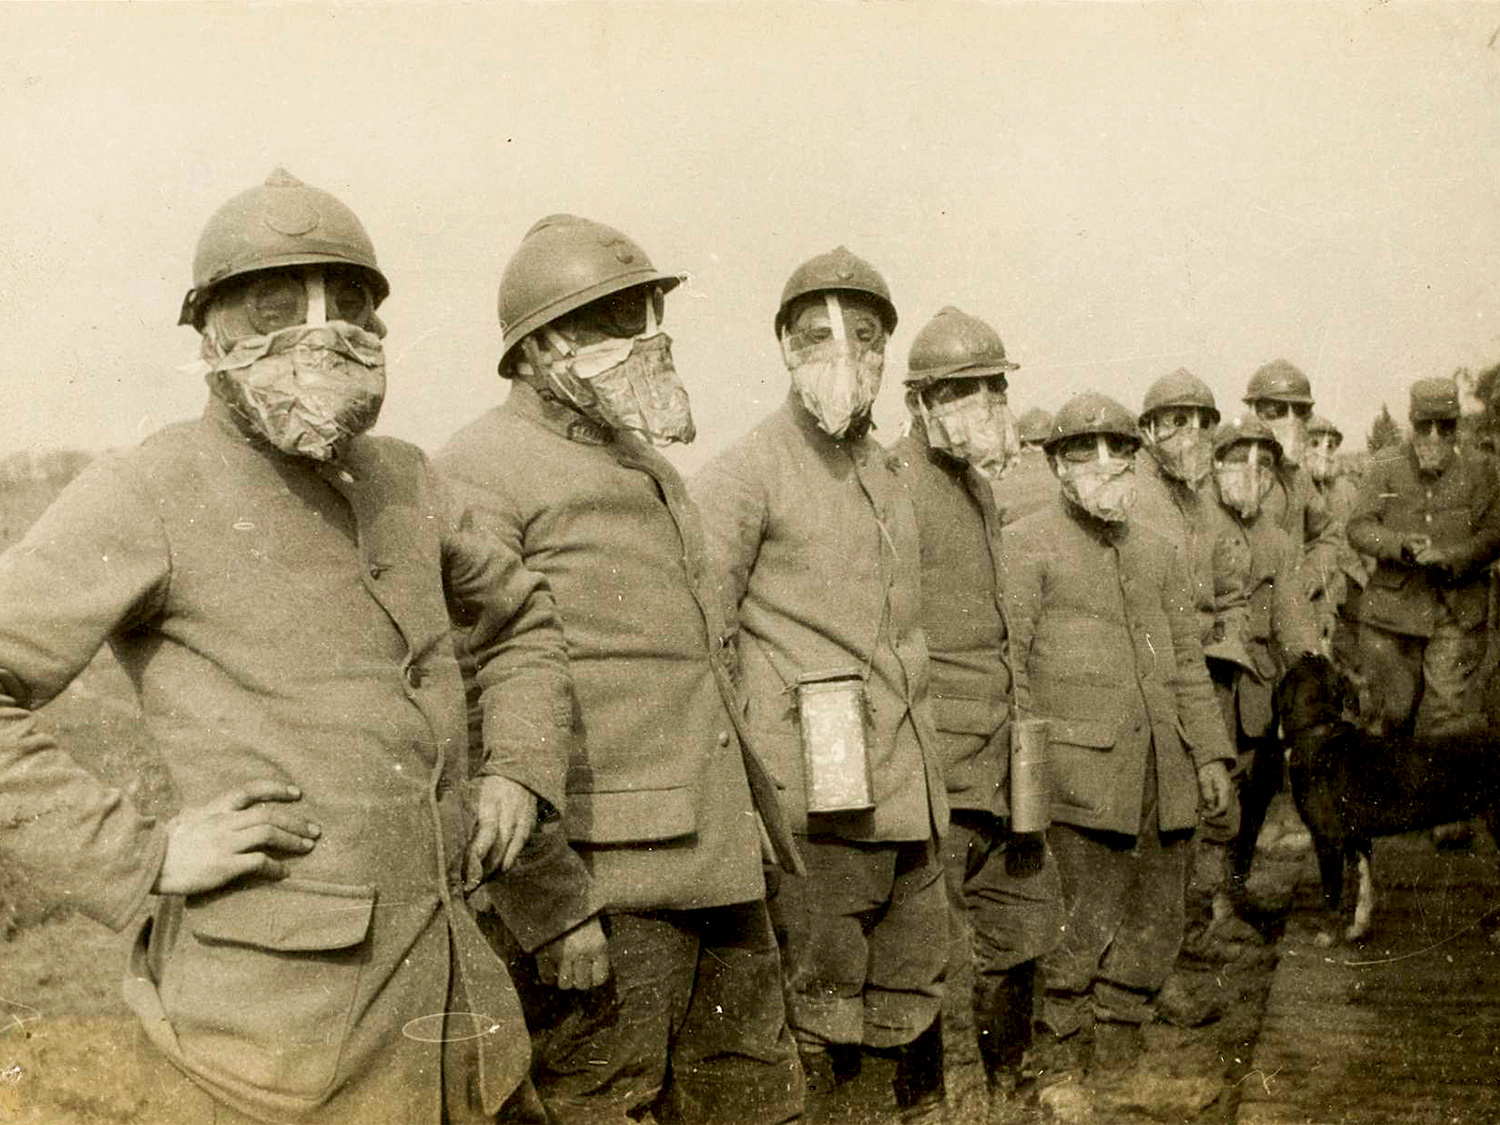 A vinatge photo showing an officer inspecting a line of soldiers weaing the Tampon TN model gas mask in Argonne, France 1916